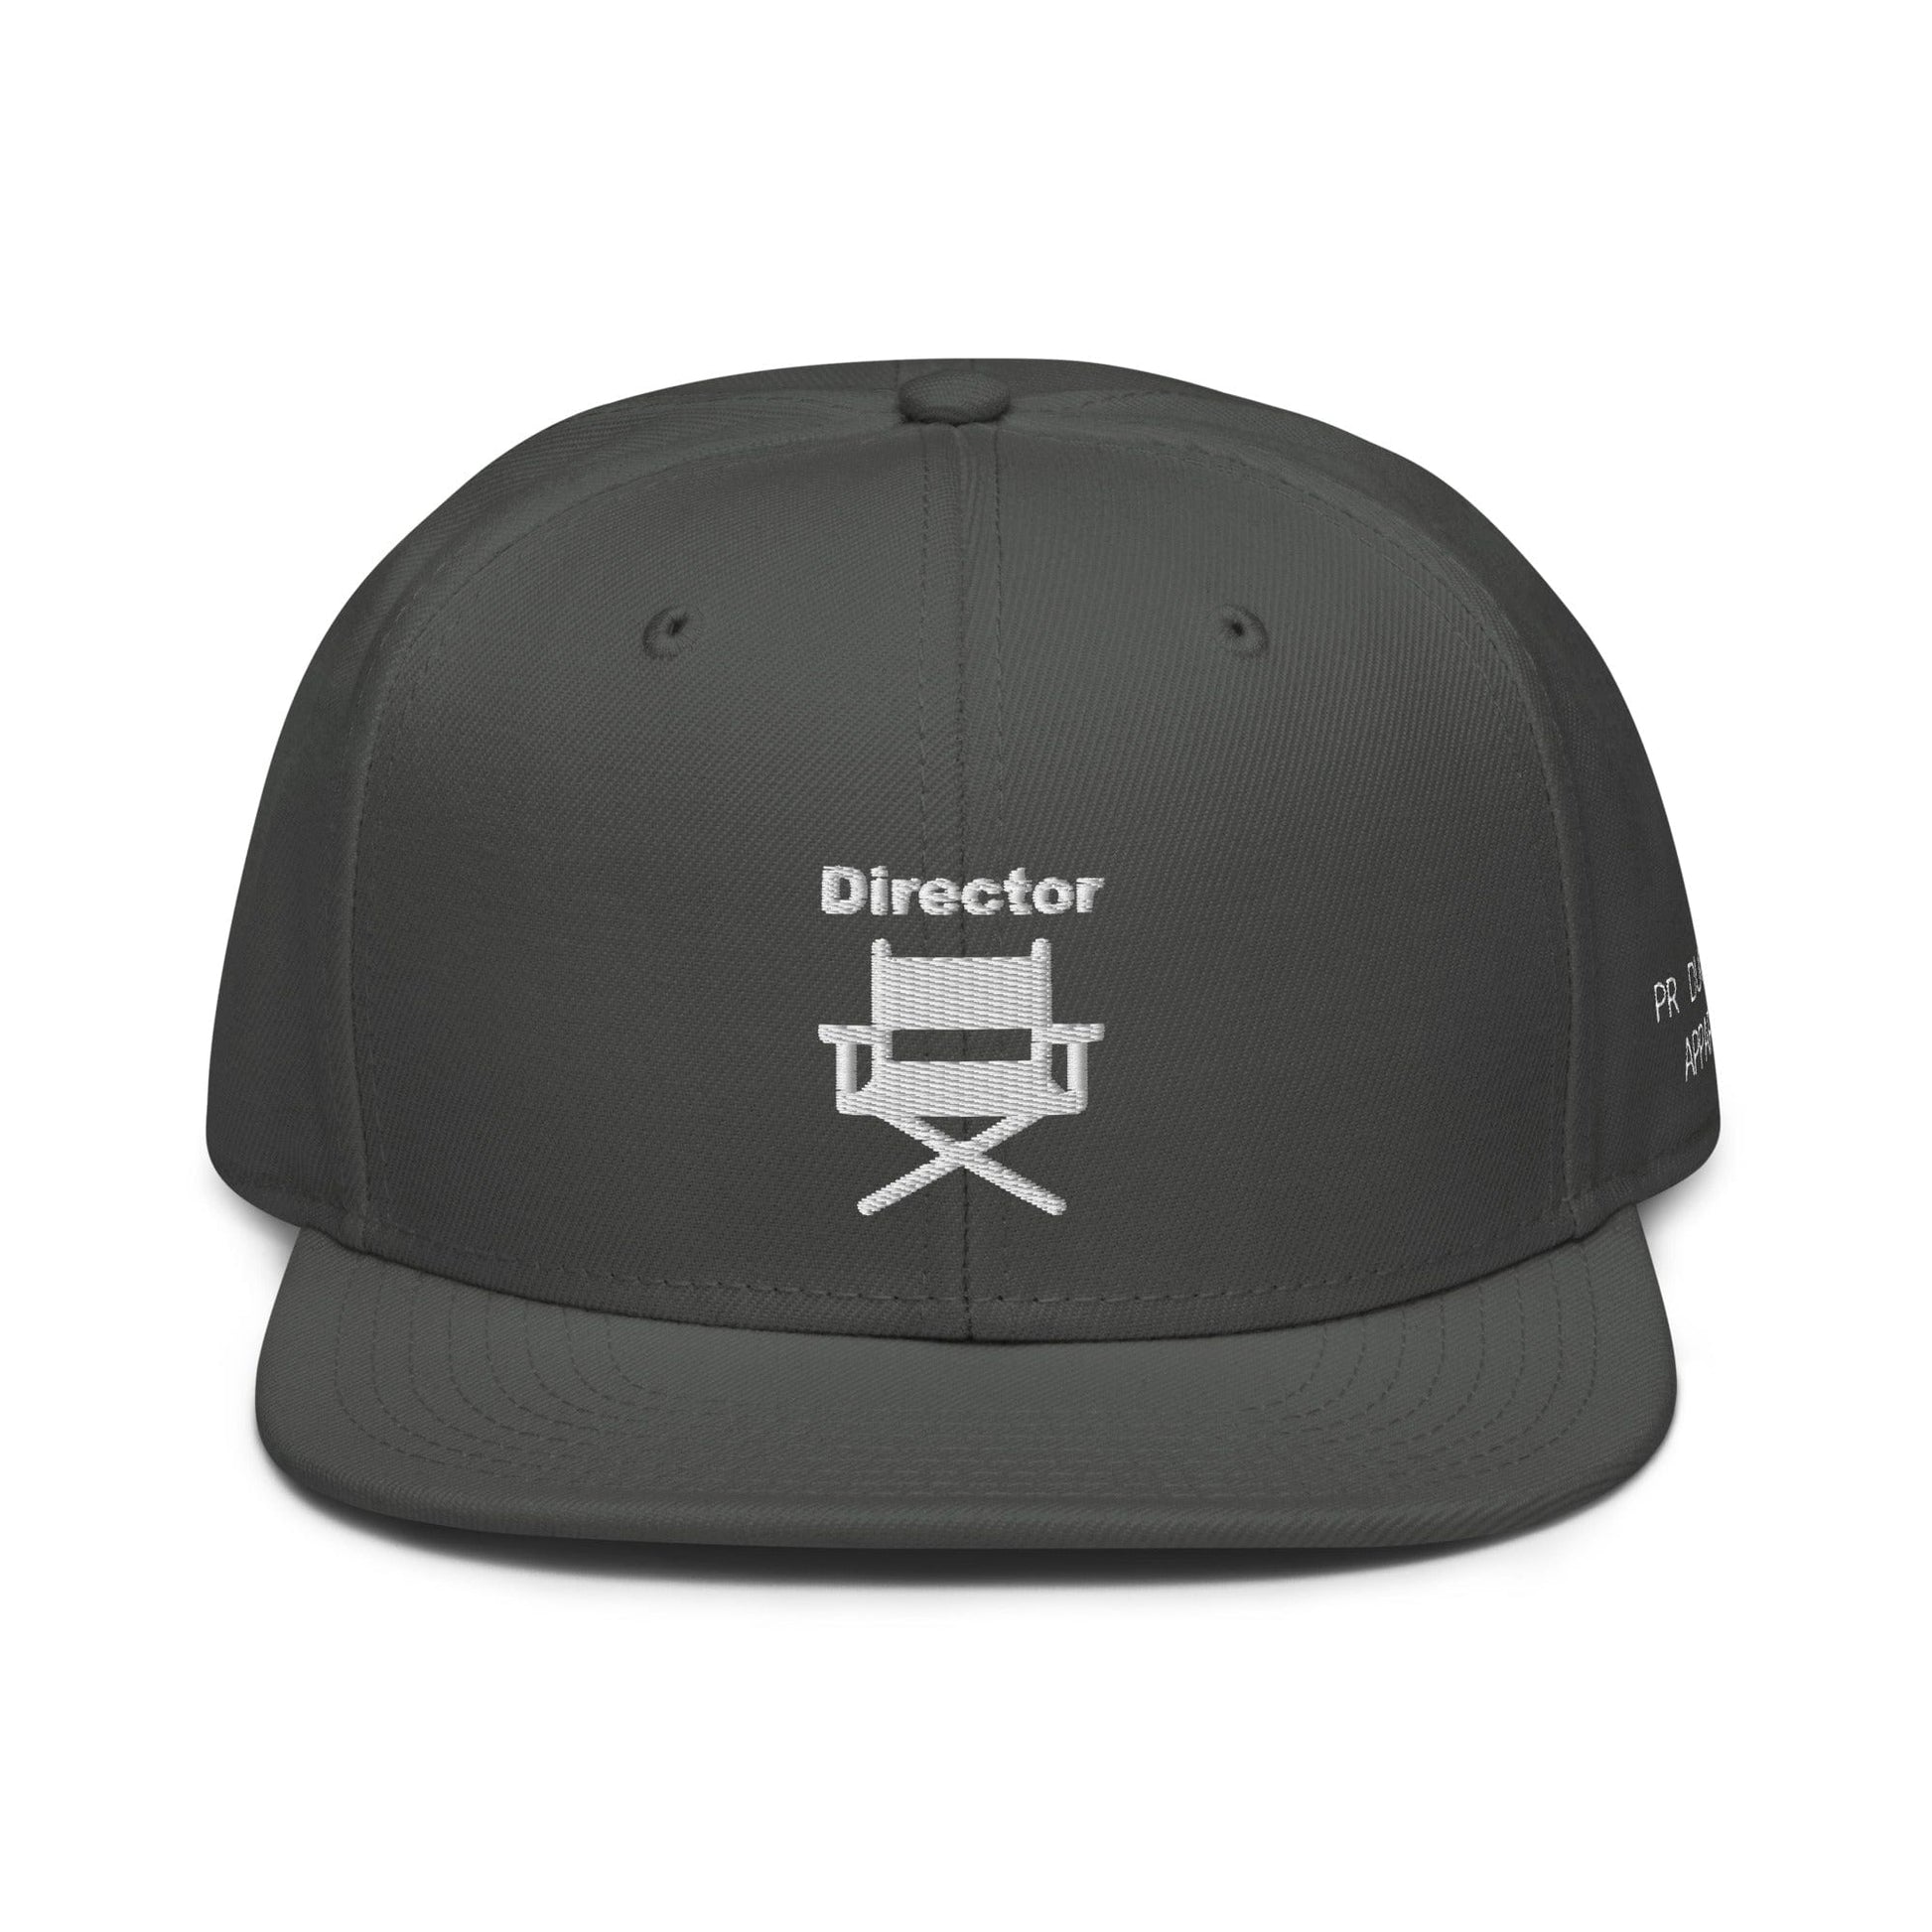 Production Apparel Director Hat Charcoal gray